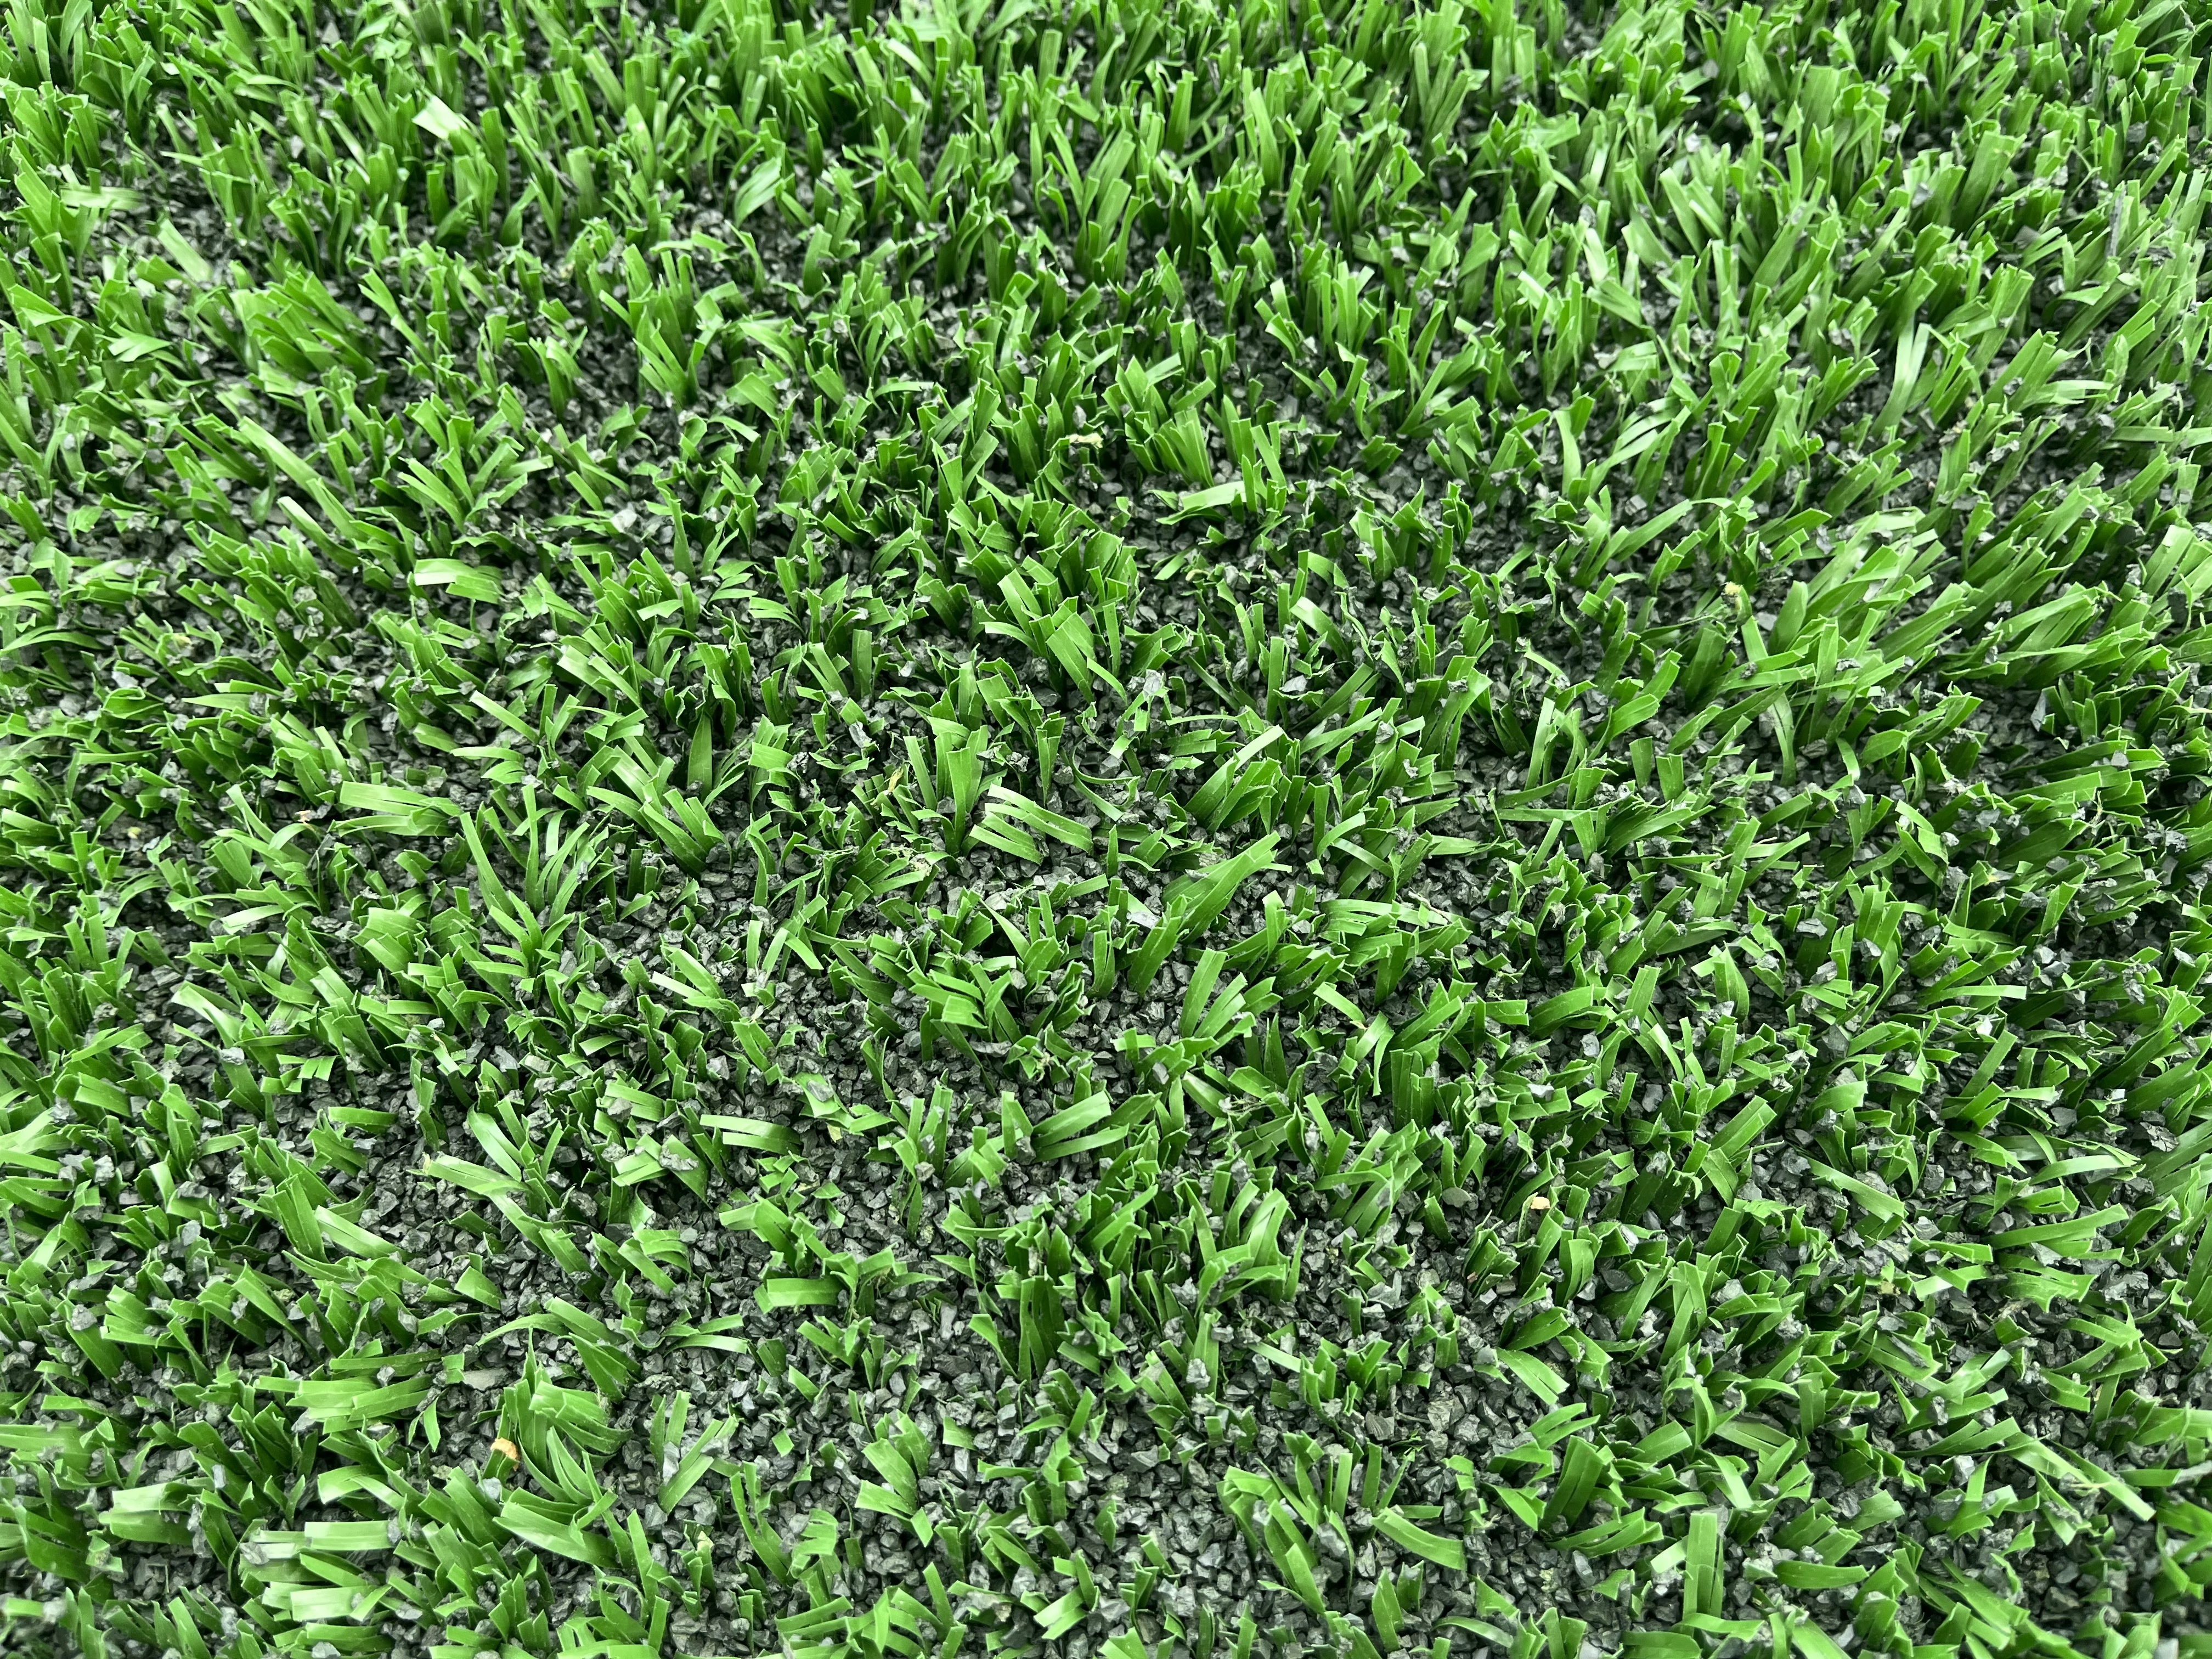 a close up of green plastic turf with rubber pellet infill